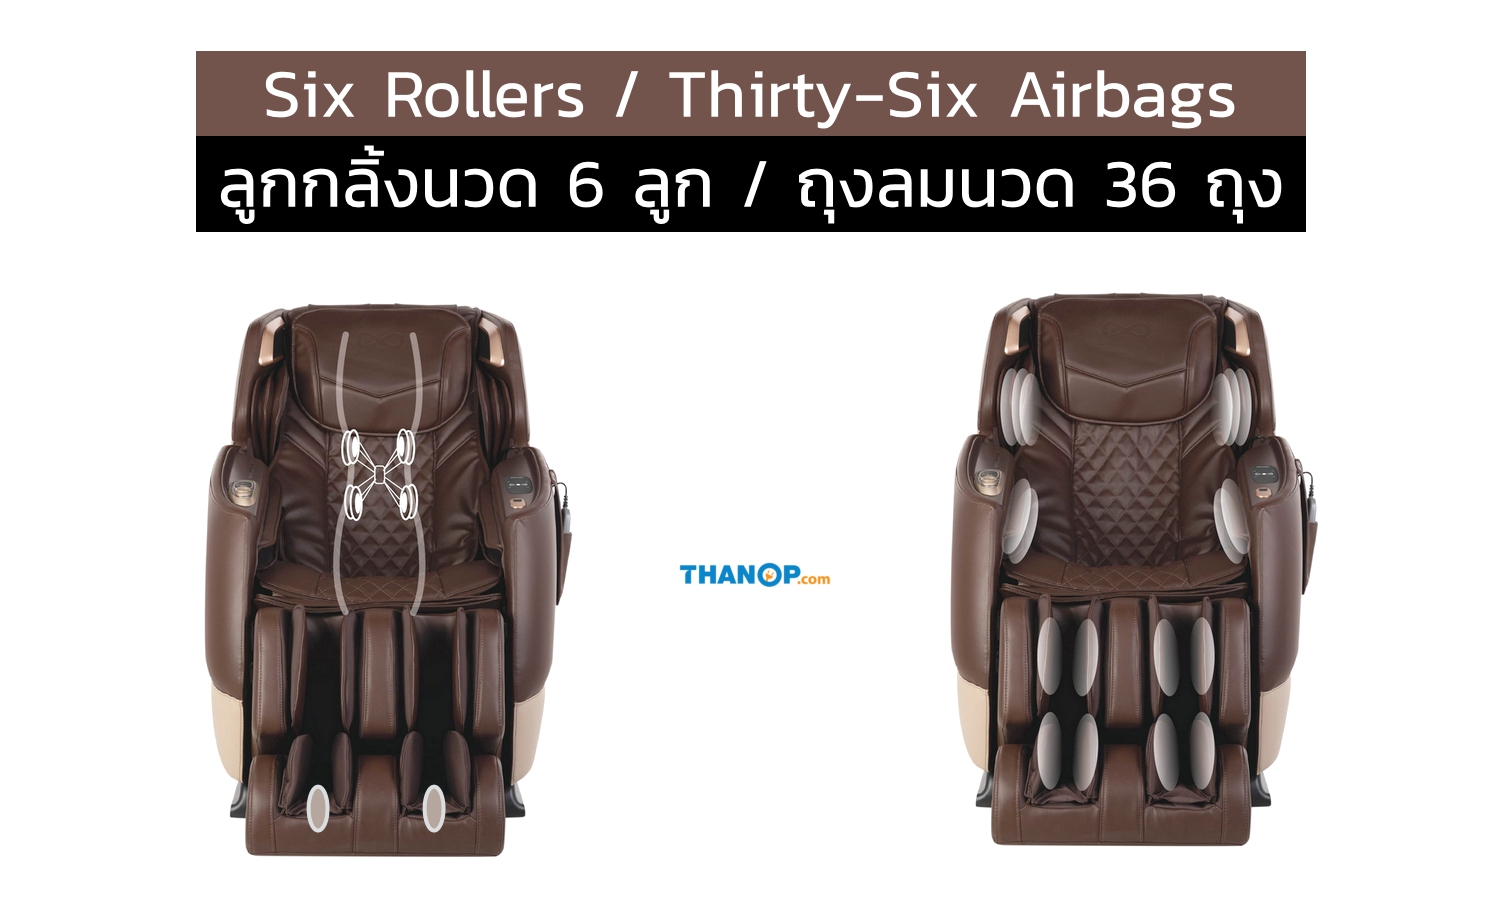 rester-alpha-ec3209f-feature-six-rollers-and-thirty-six-airbags